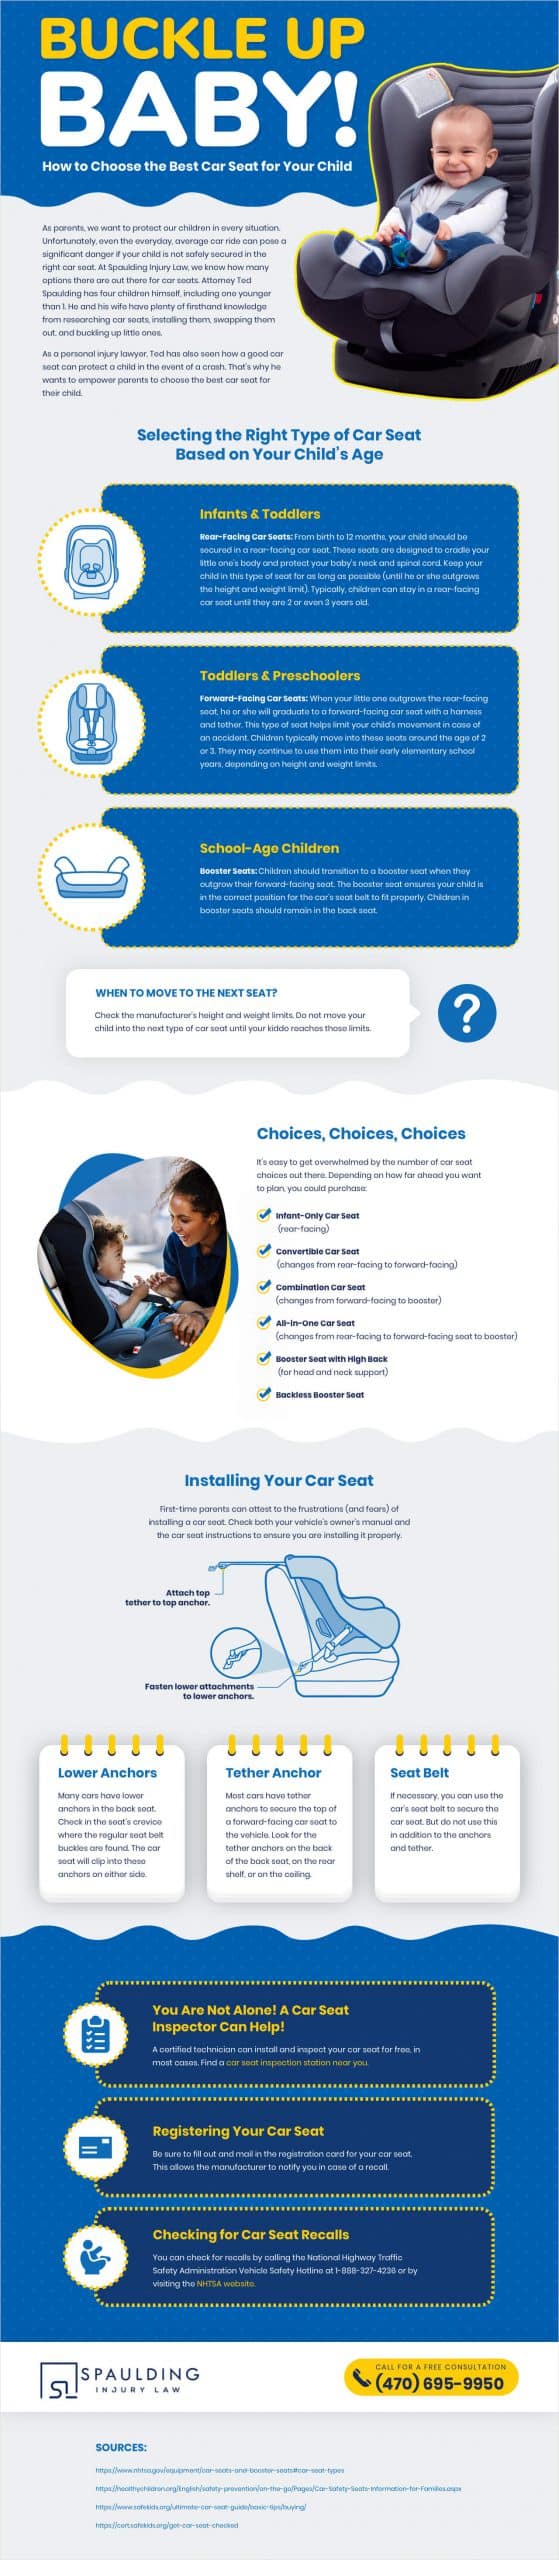 https://www.spauldinginjurylaw.com/wp-content/uploads/2022/01/How-to-Choose-the-Best-Car-Seat-for-Your-Child-infographic-1-scaled.jpeg